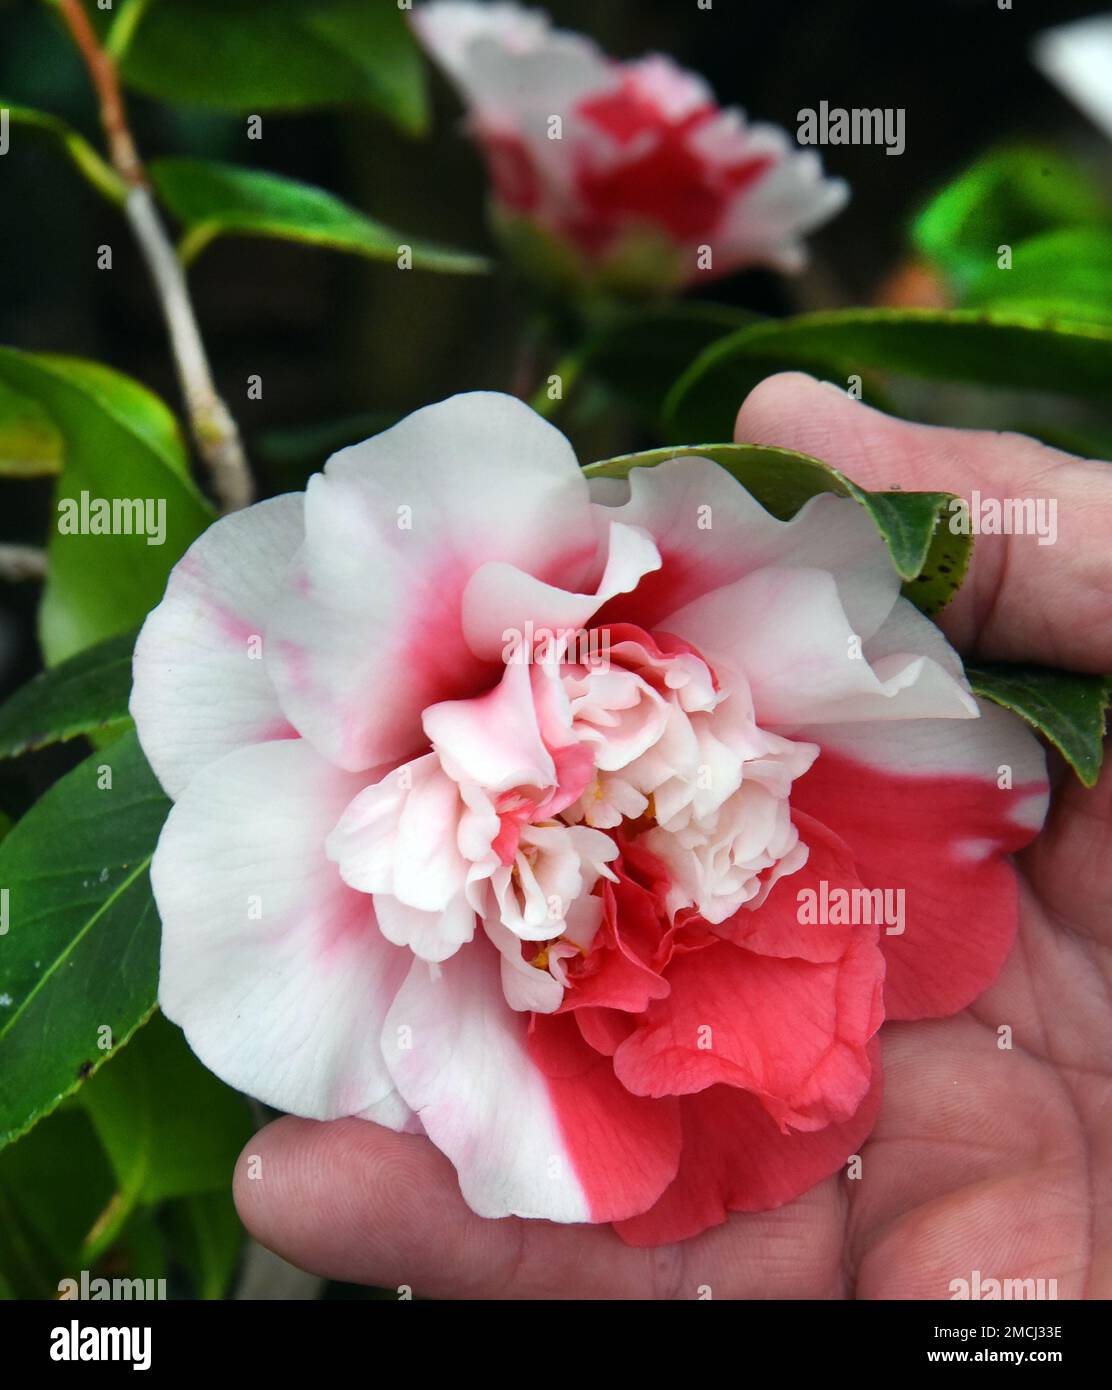 PRODUCTION - 21 January 2023, Saxony, Roßwein: In the camellia house in Wolfstal, the camellia Collettii shows its white-red flowers. At present, the greenhouse, which is looked after by members of the Heimatverein Roßwein e.V., is also home to the white blooms of the over 200-year-old camellia 'Alba plena'. The 6.50-meter-high plant, also known as the Tea Rose of Winter with its double flowers up to 10 centimeters in size, is said to have been planted in the 18th century by Count von Einsiedel at Gersdorf near Roßwein. The botanical rarity is after the famous Pillnitz camellia the second olde Stock Photo